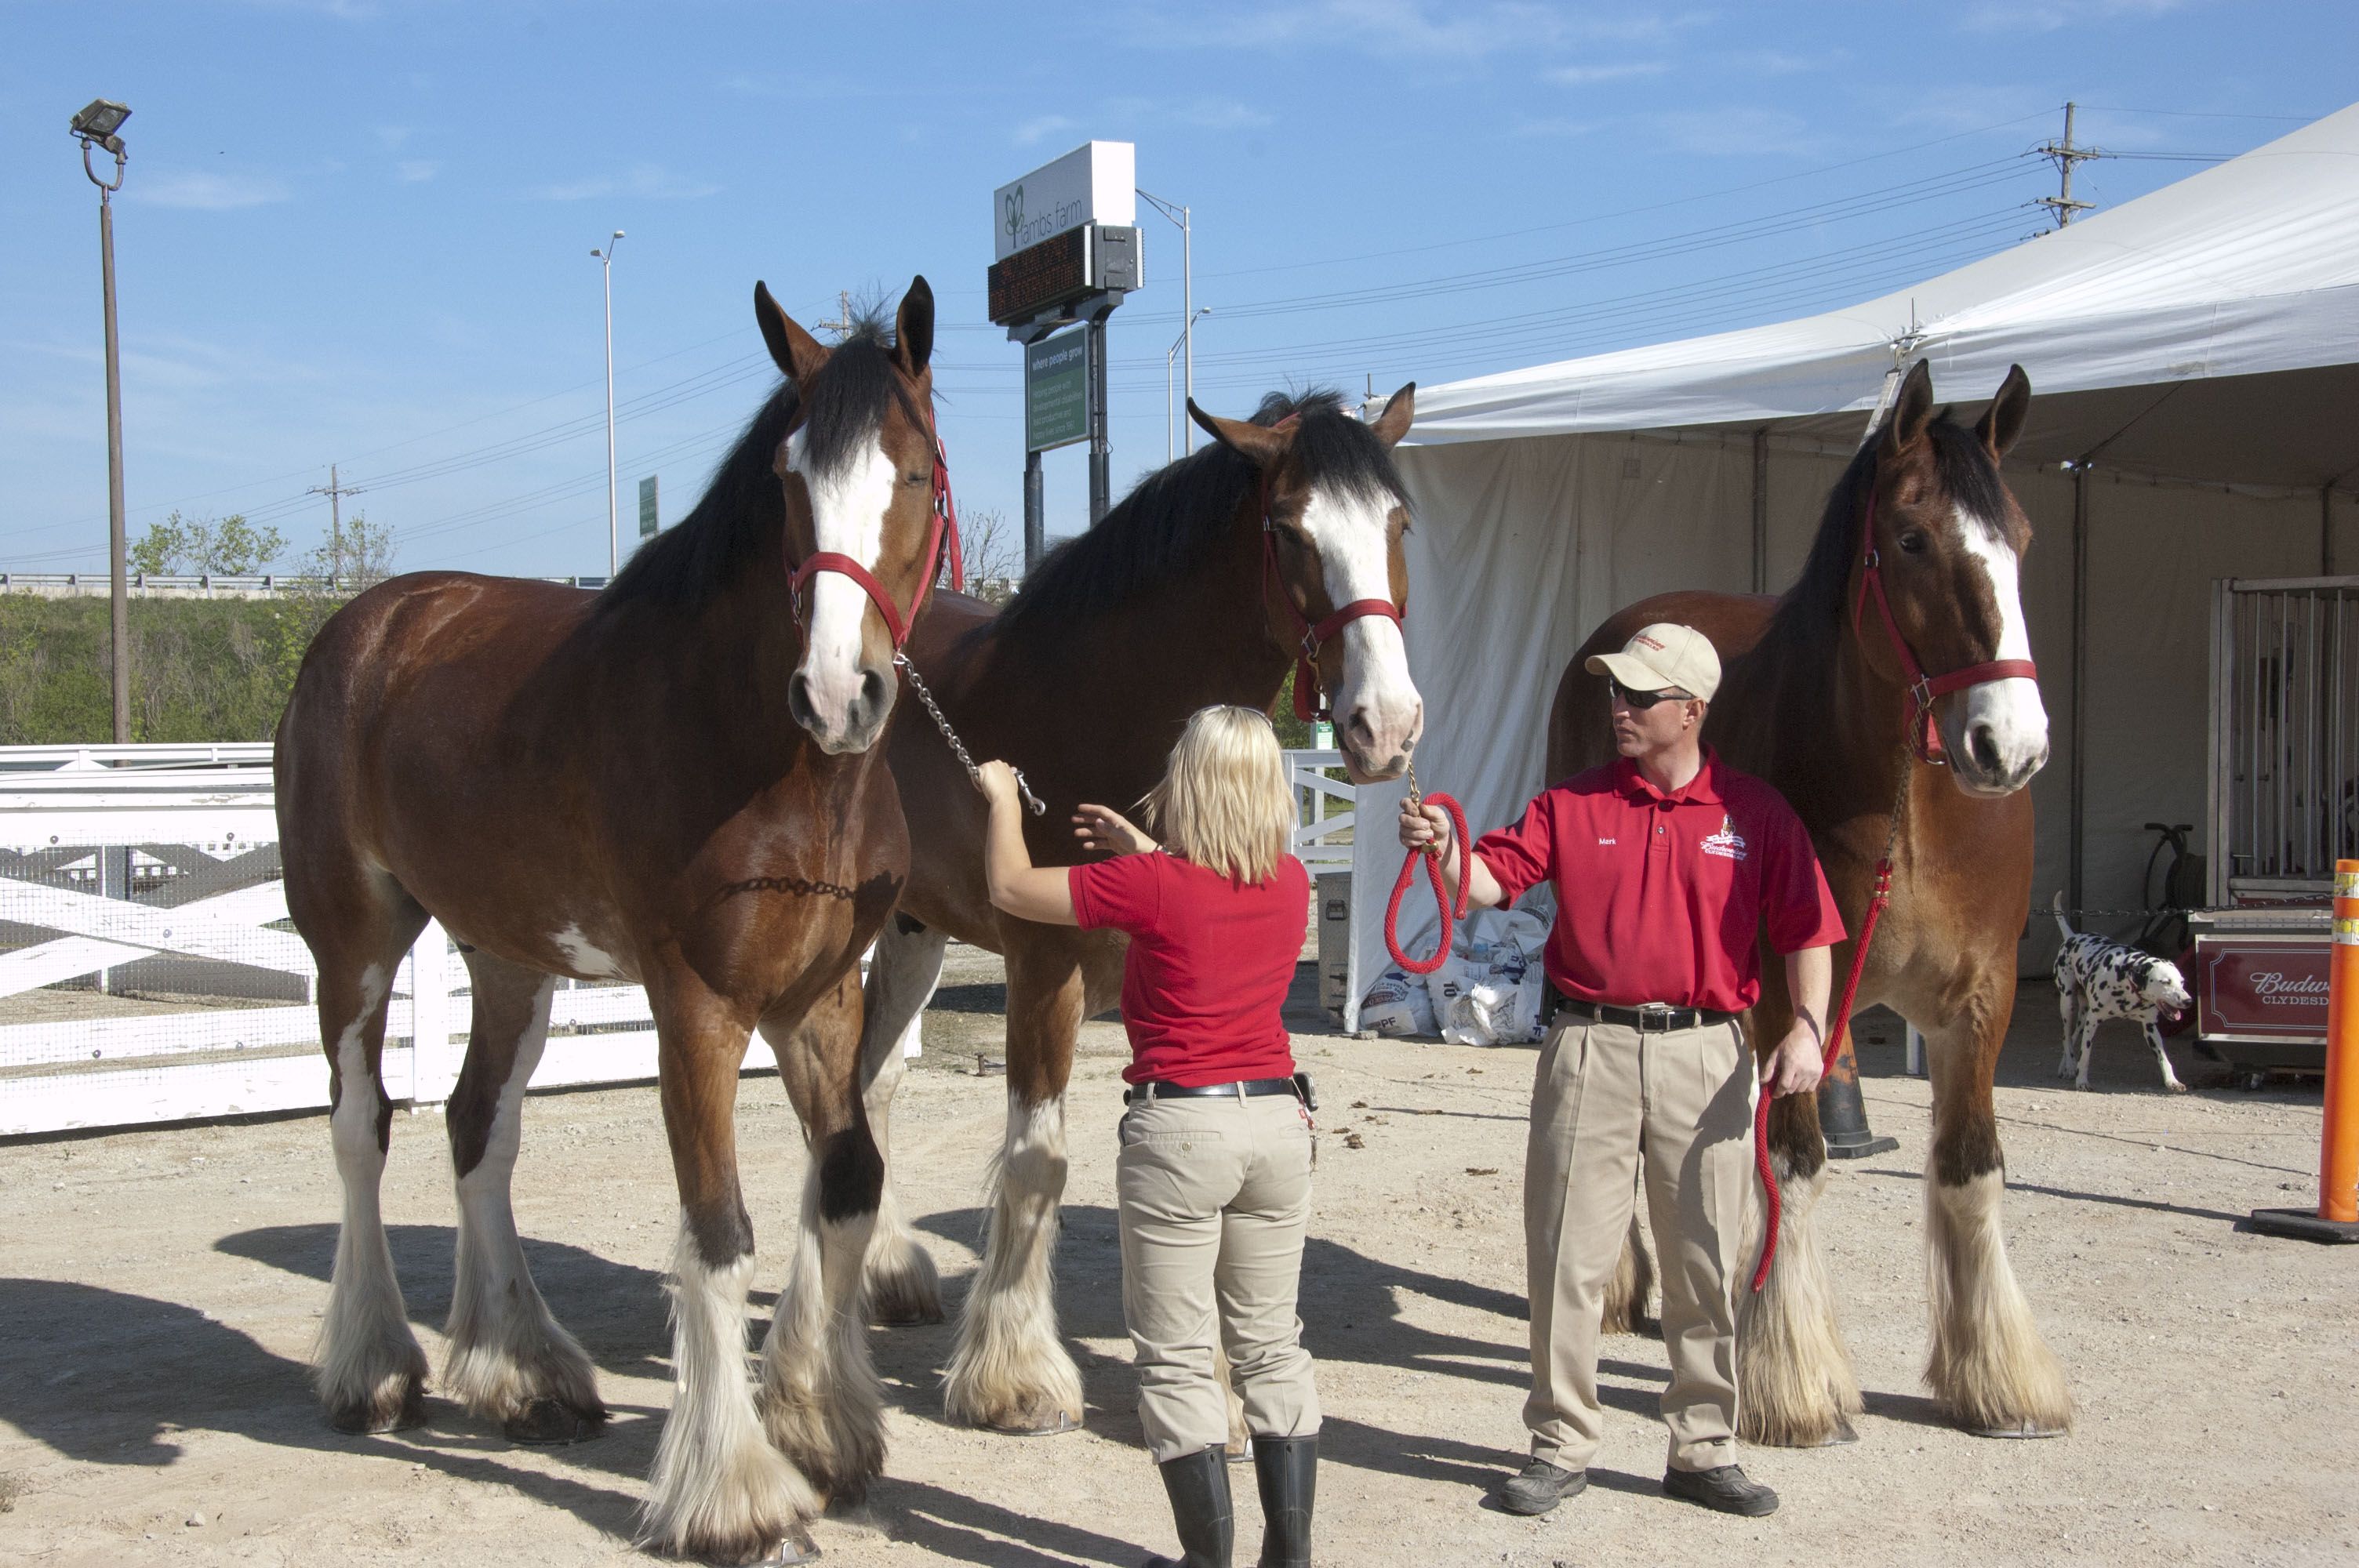 Budweiser Clydesdales at Lambs Farm | Events | Pinterest ...